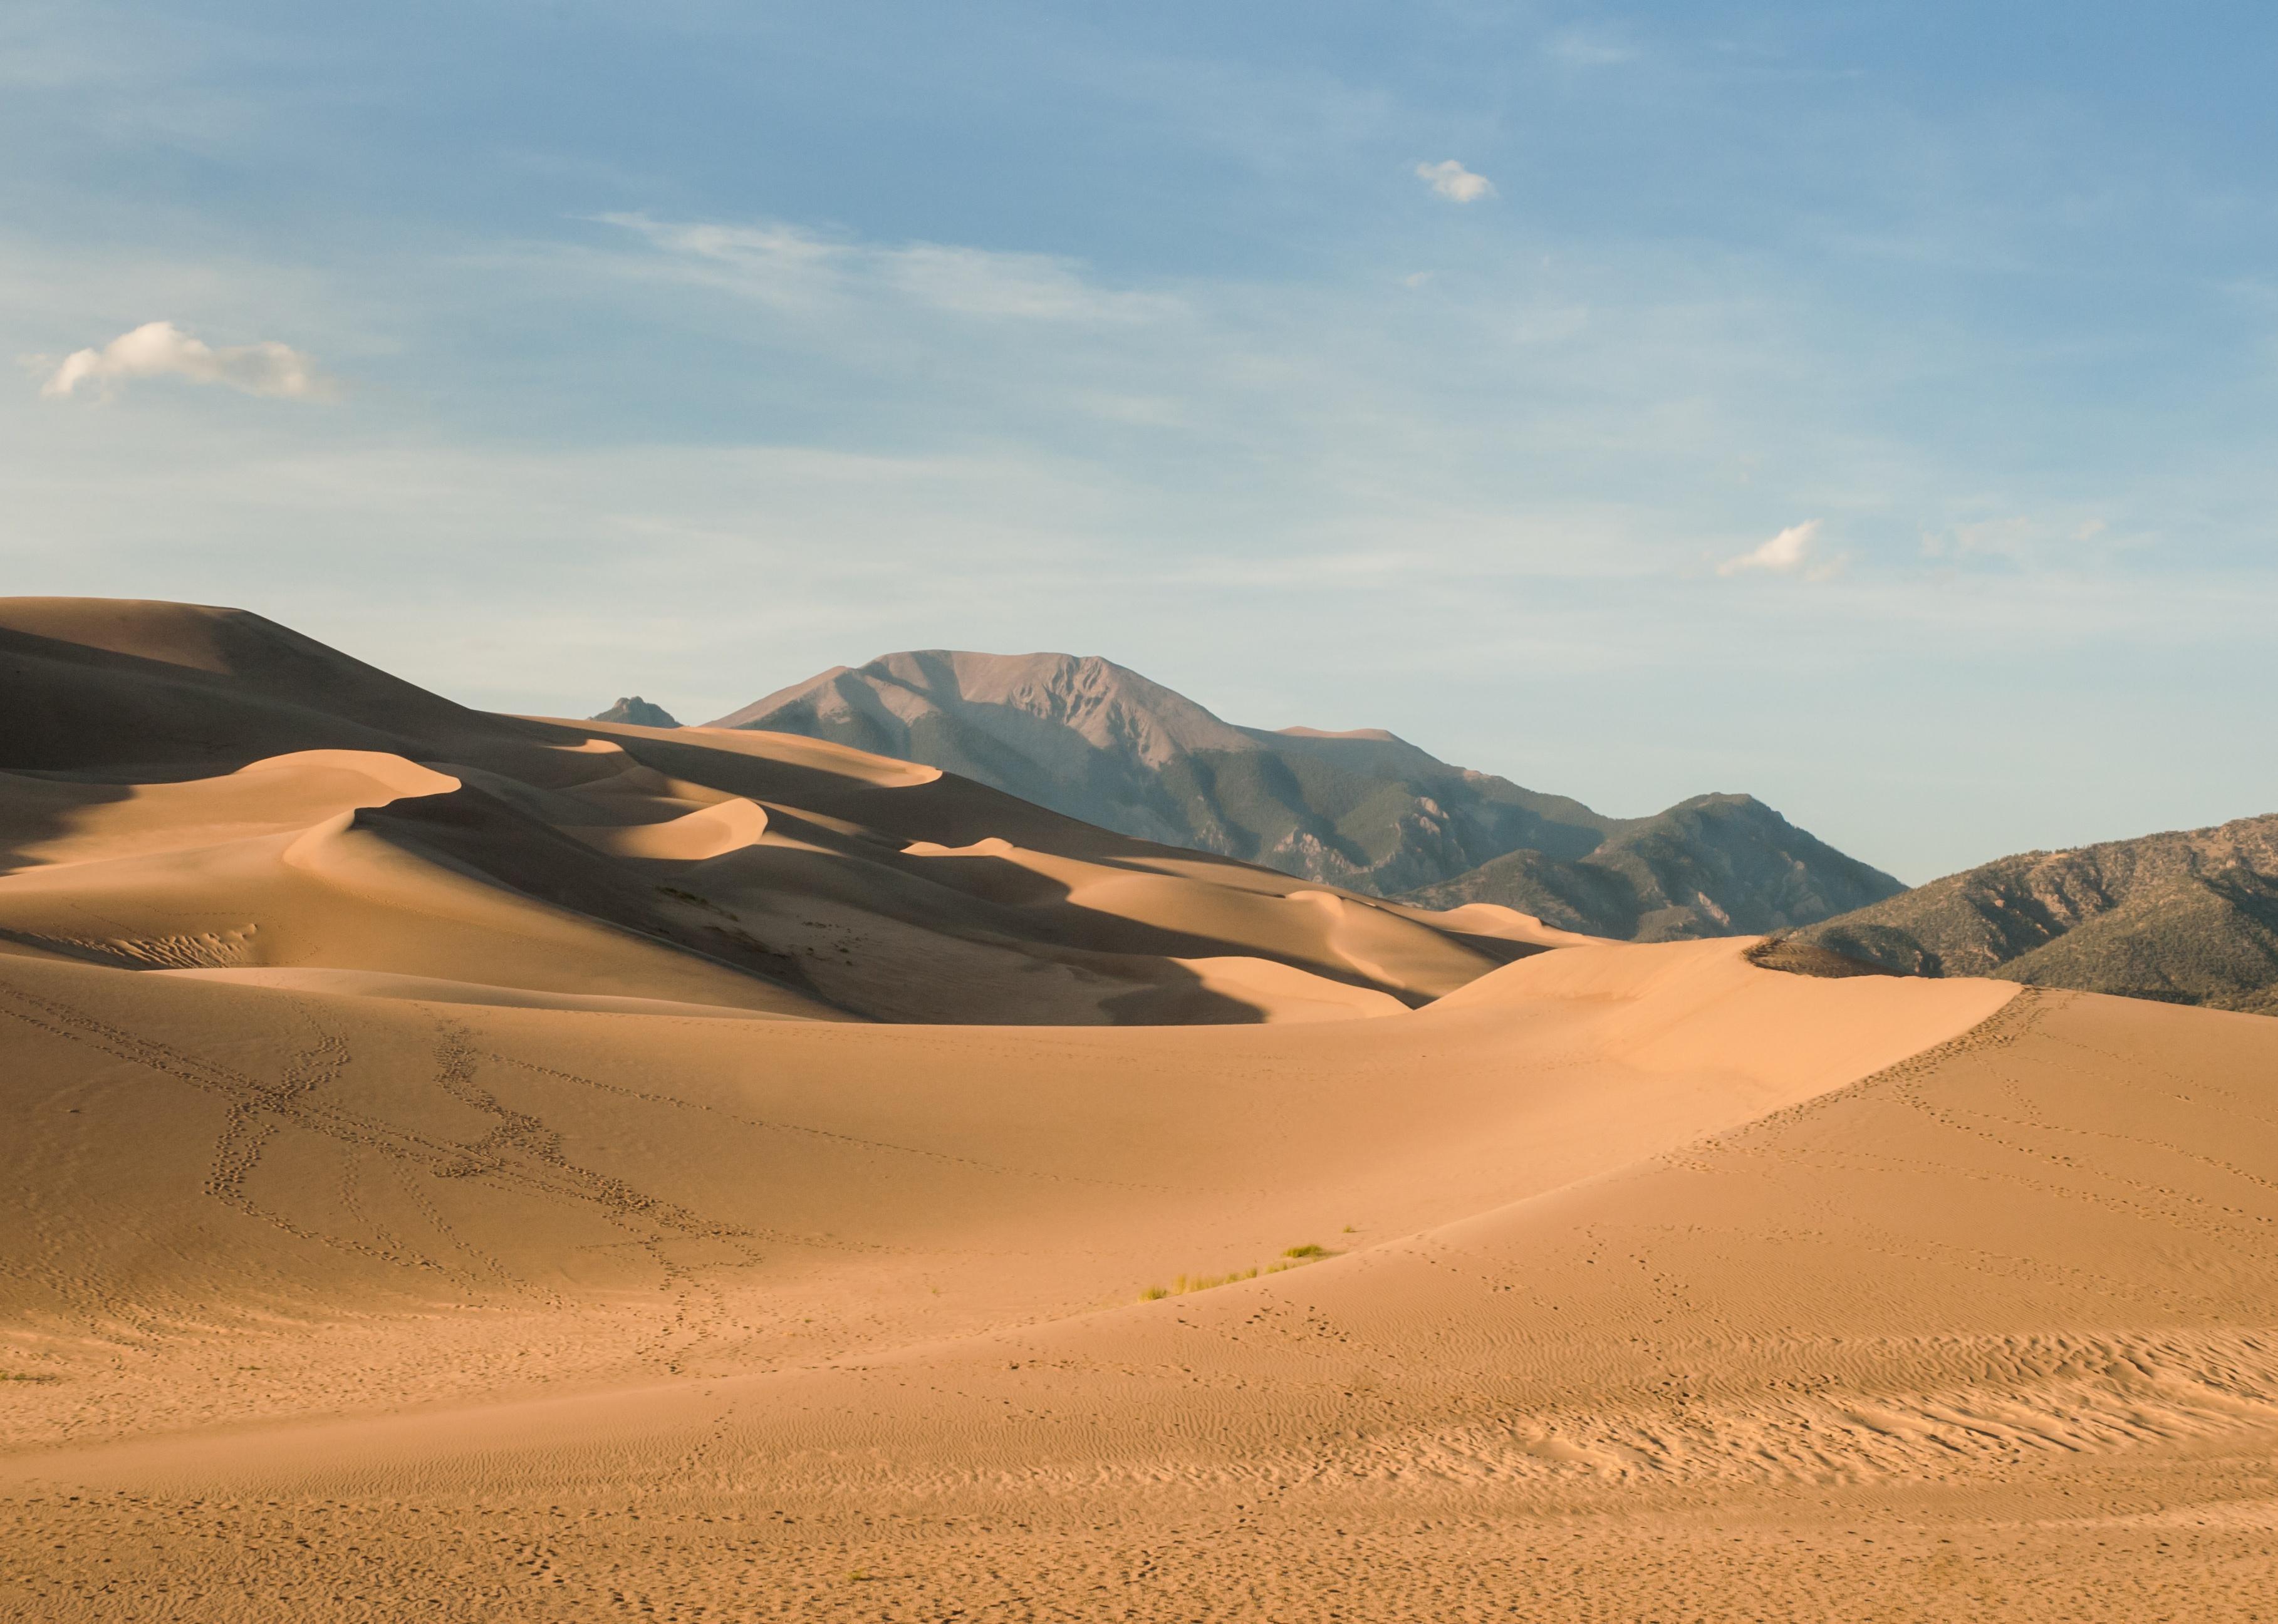 Late afternoon at The Great Sand Dunes National Park.